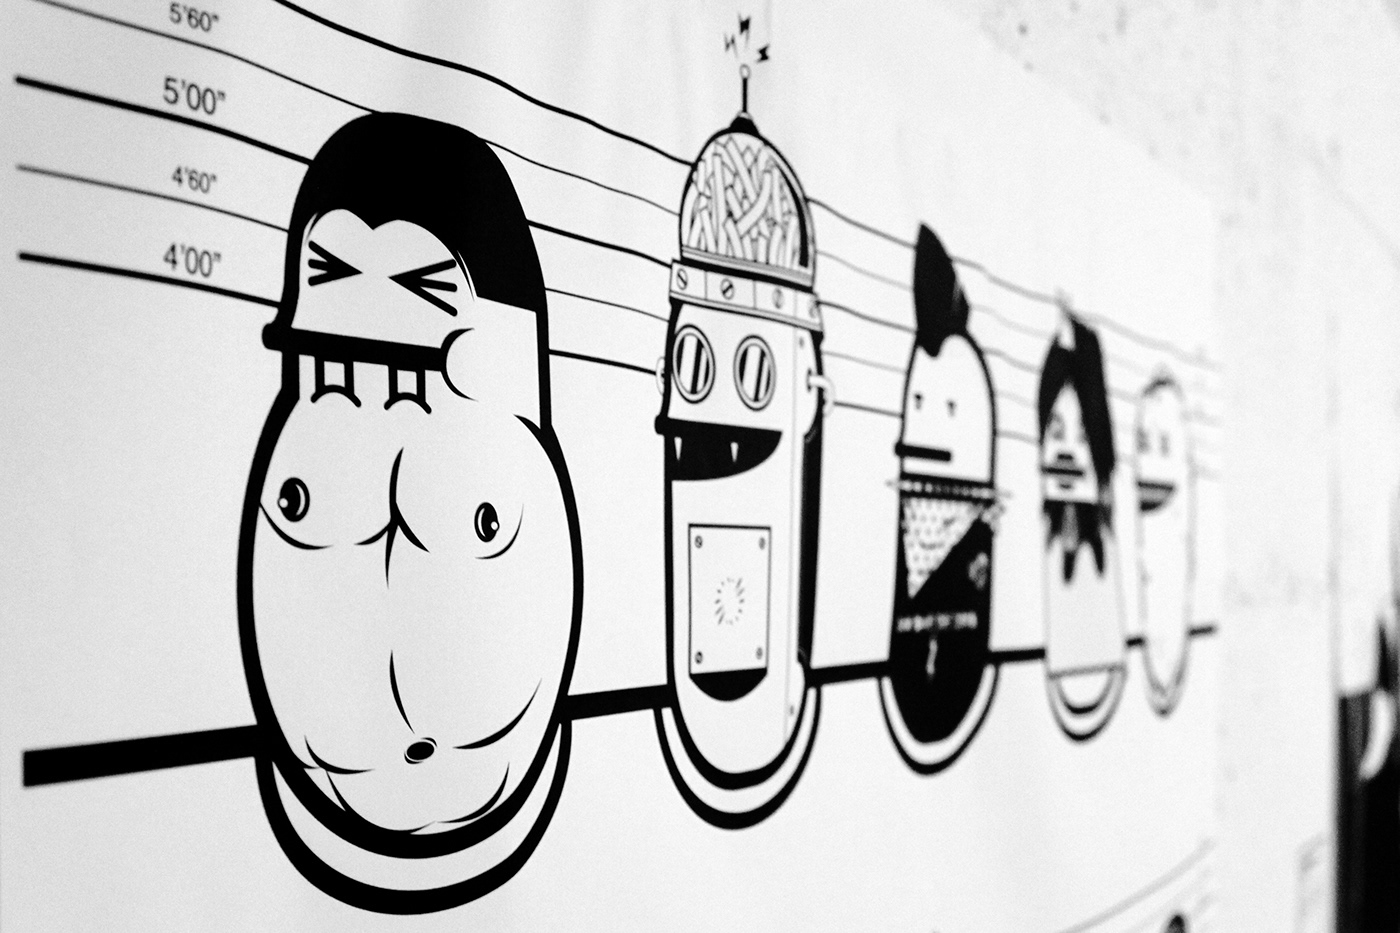 arsenic black and white characters drop Exhibition  ILLUSTRATION  Lausanne pbk9 Street Art 